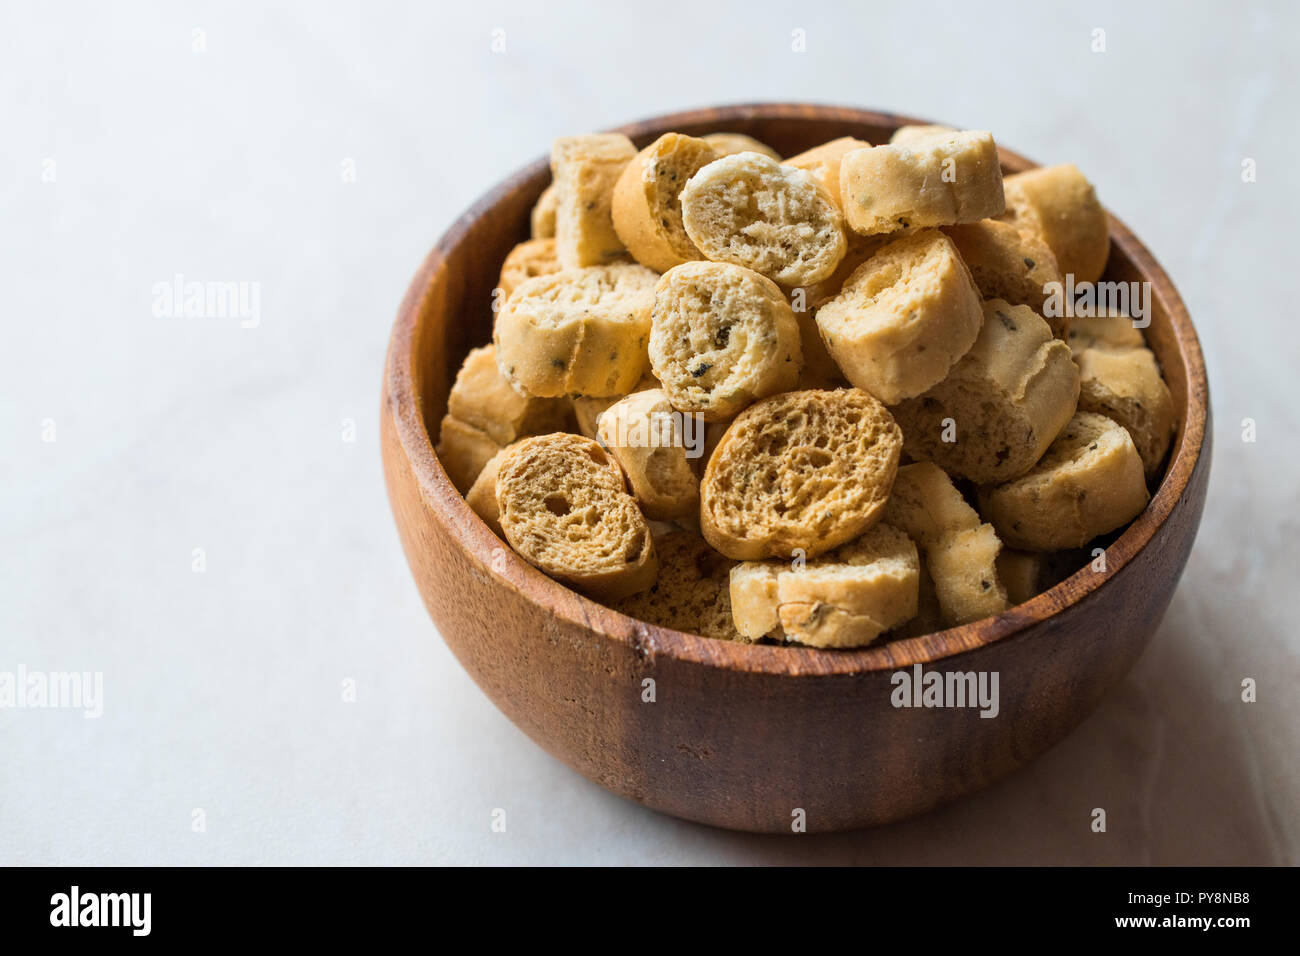 Stack of Round Shaped Crispy Rye Crouton Bread Biscuits / Crostini. Organic Appetizer Chips. Stock Photo